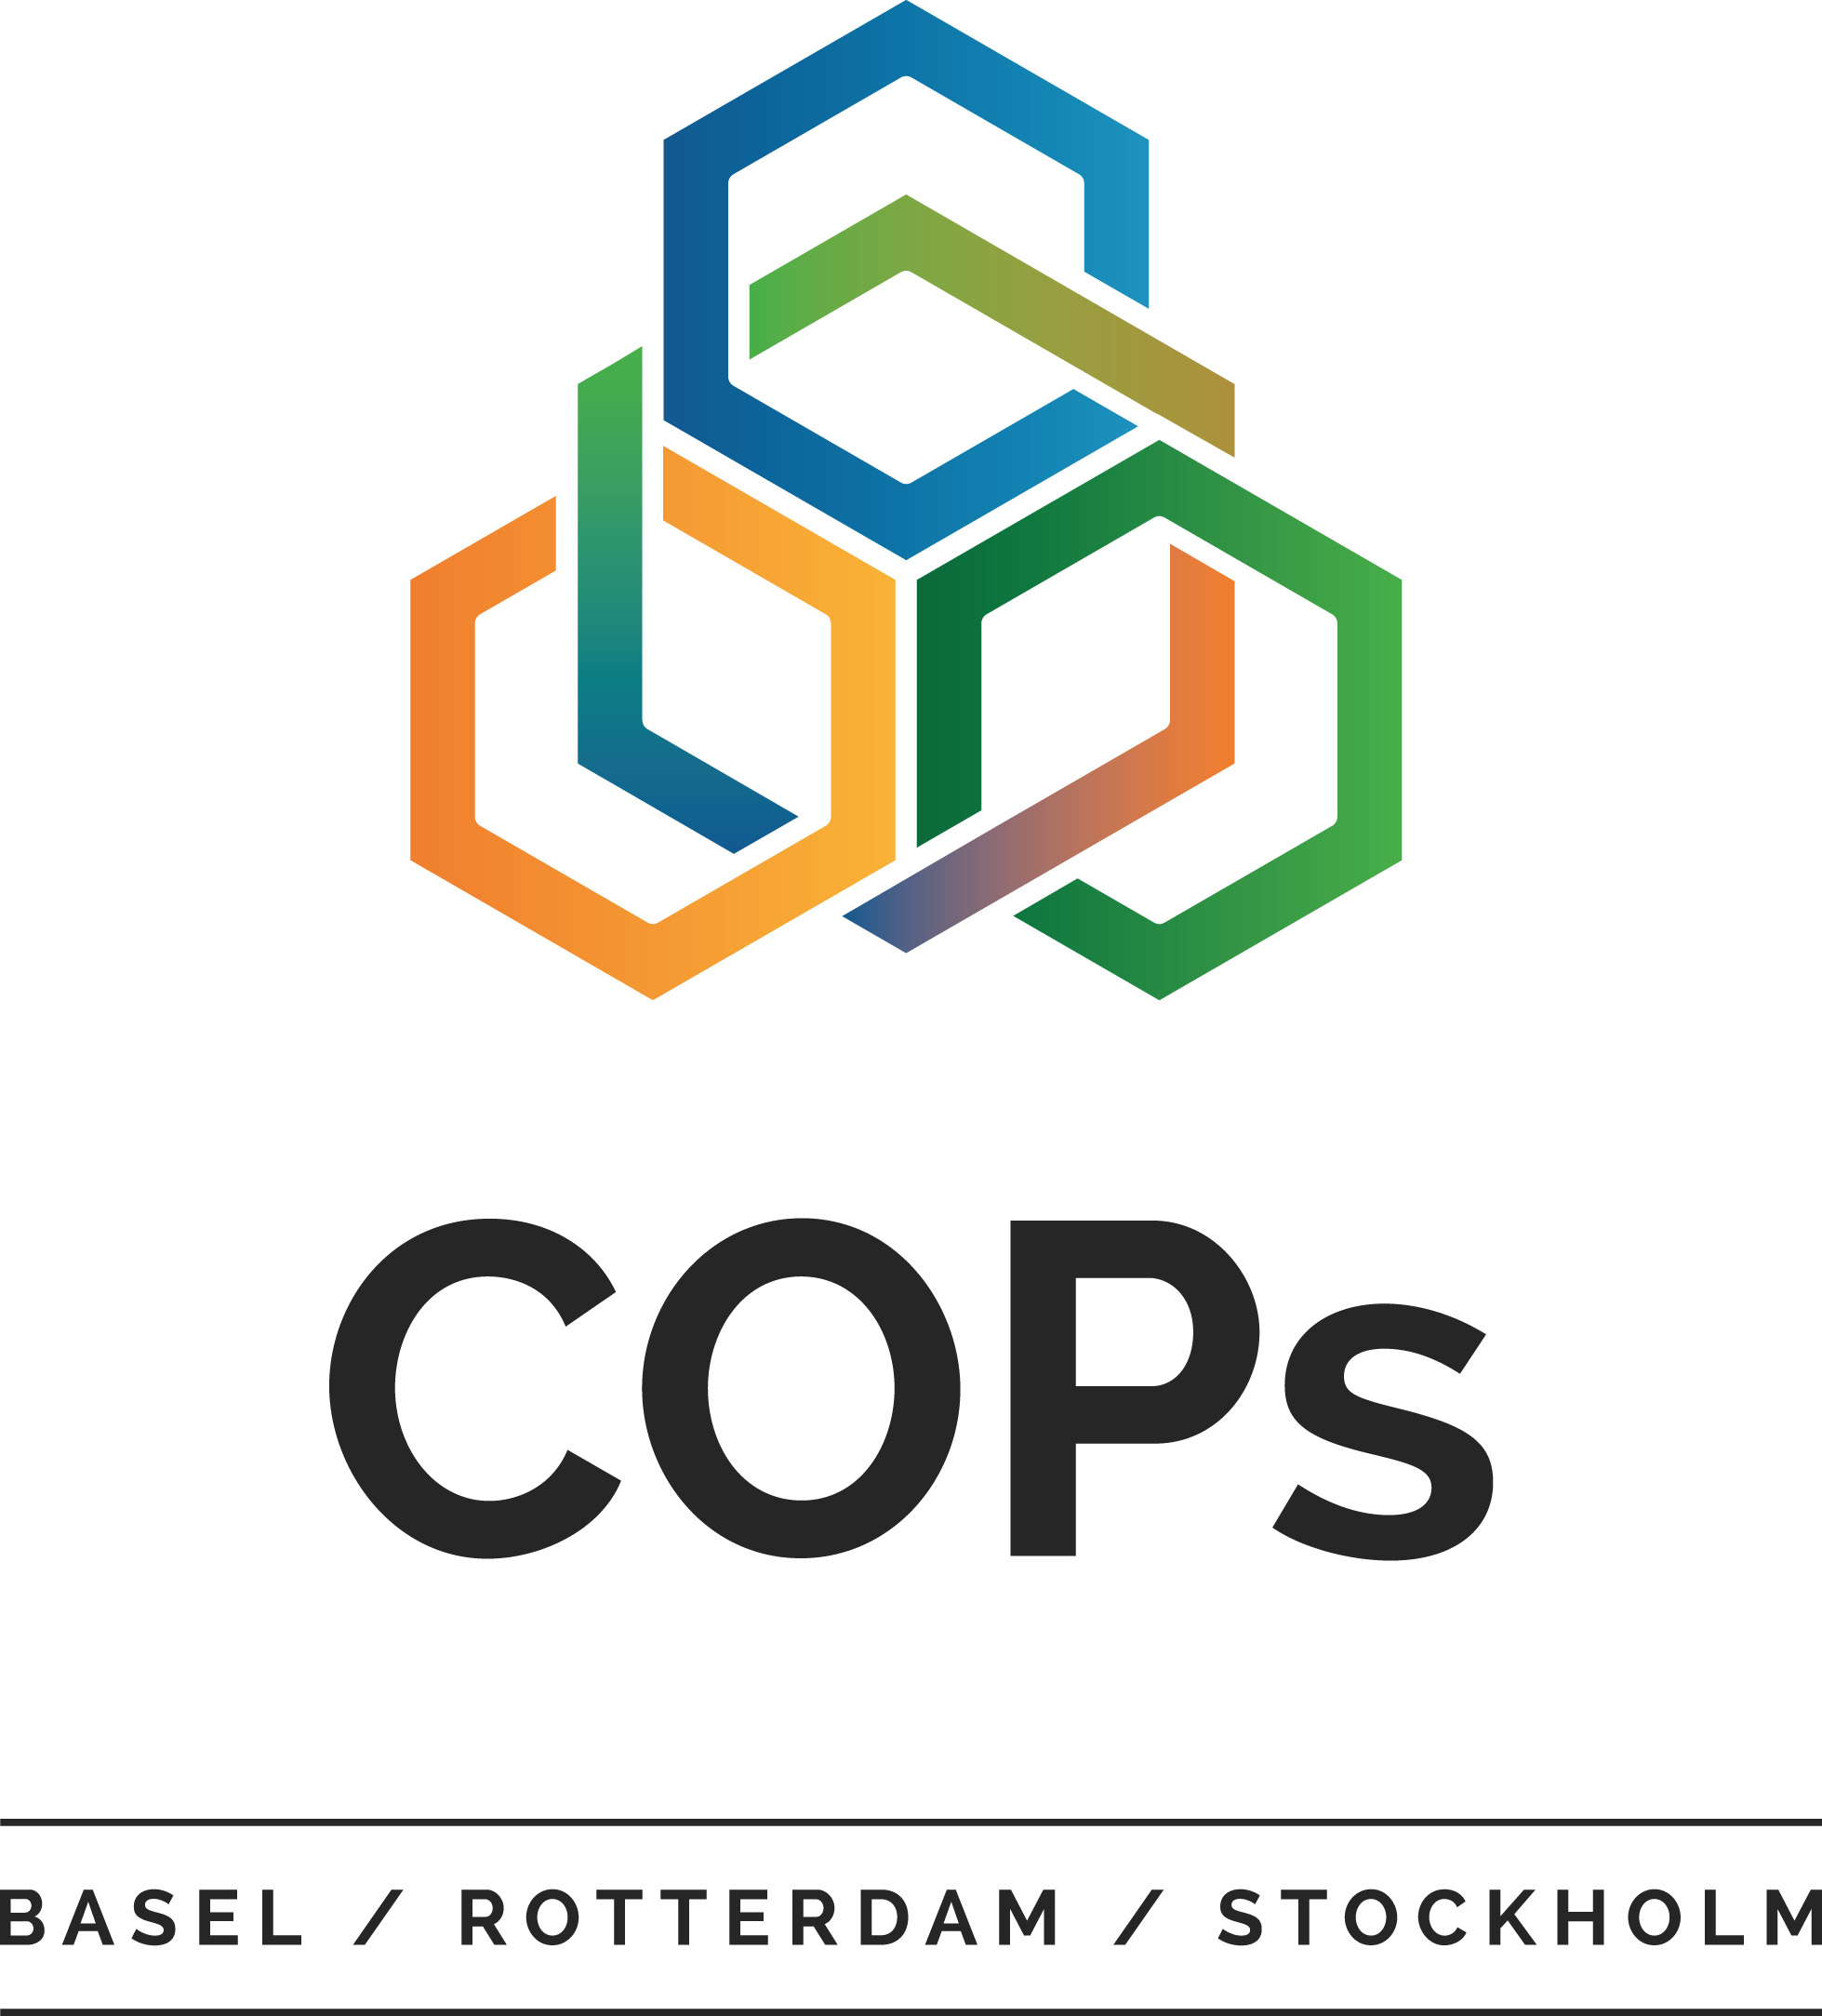 COPS_Identity_conventions_vertical_6993.jpg